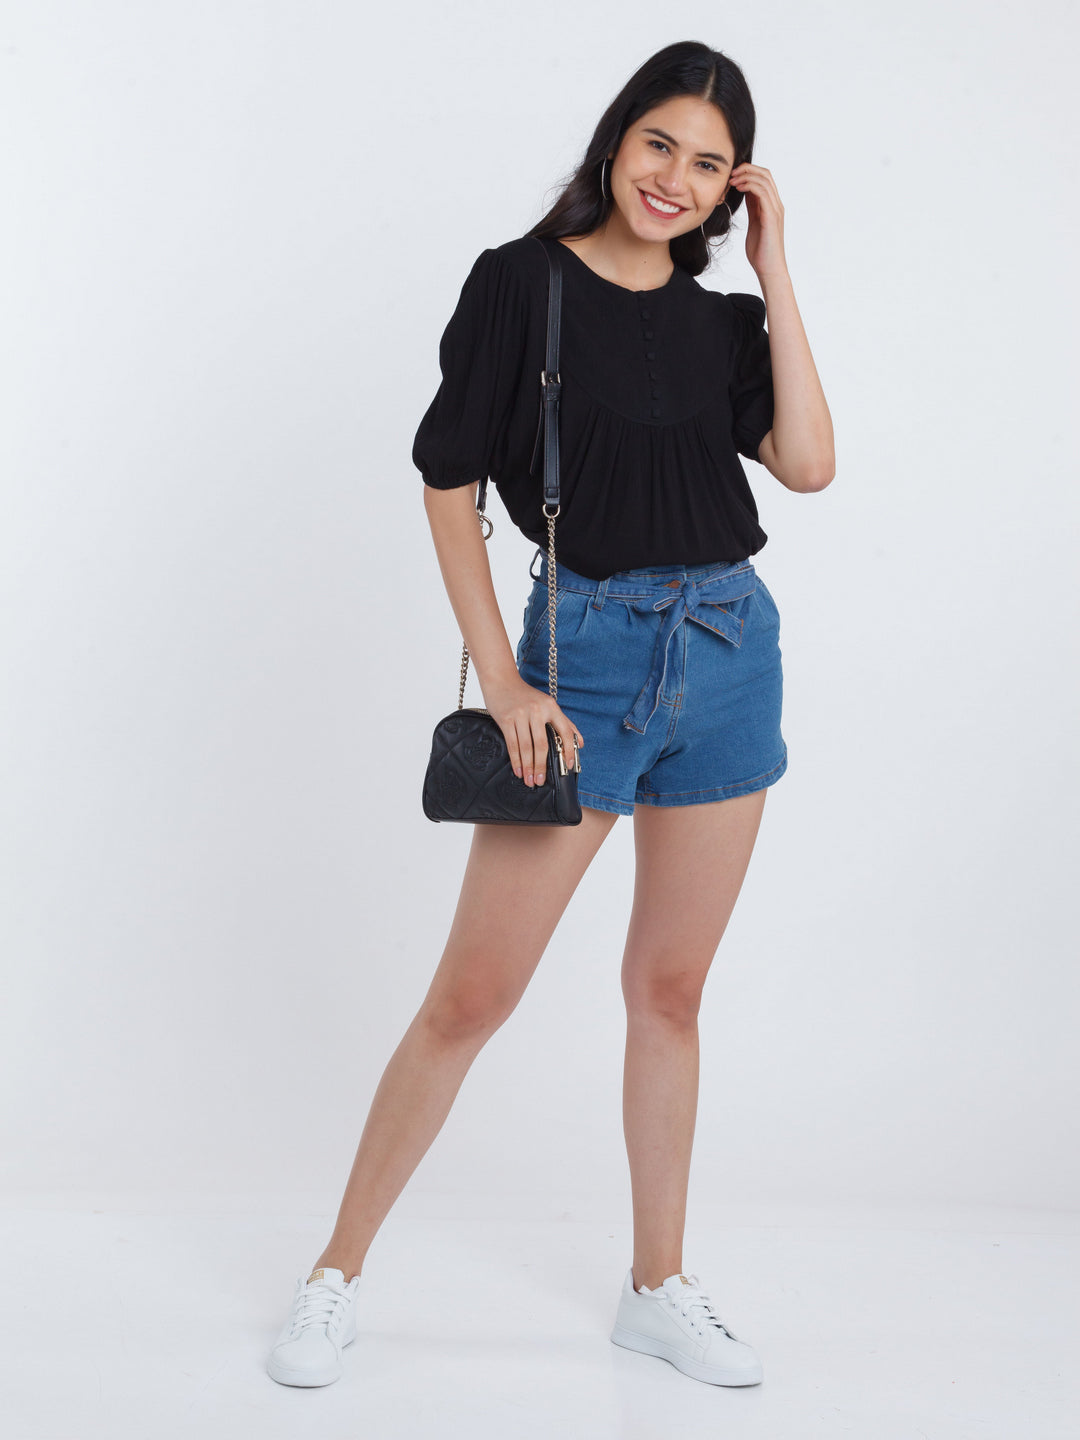 Blue Solid Tie-Up Jeans Shorts For Women